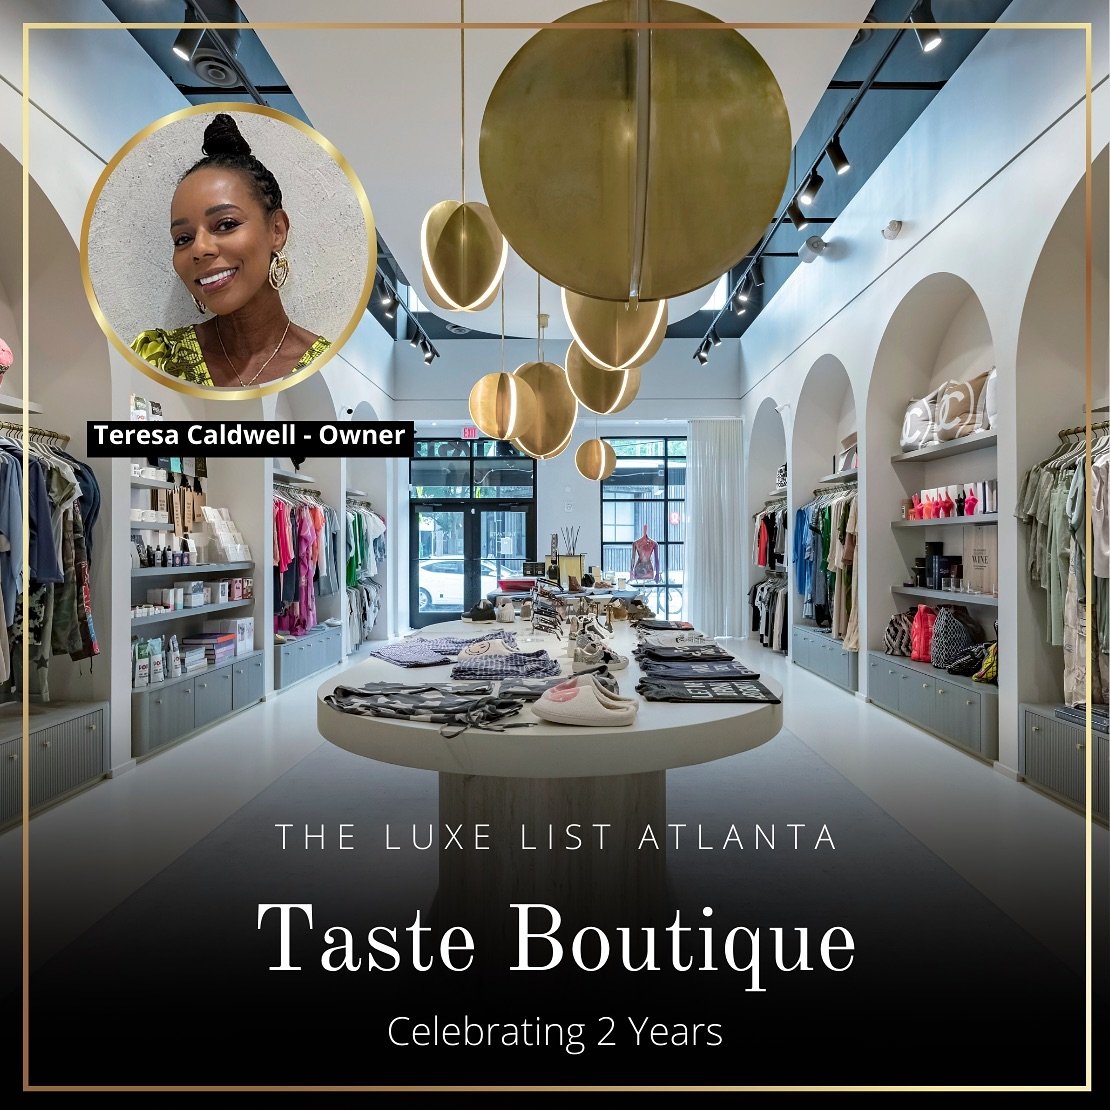 The Luxe List Atlanta toasts to @ms.teresacaldwell of @thetasteboutique.atl for celebrating 2 years in one of the hottest retail districts in Atlanta, West Midtown!

Join me at THE SOCIETY MIXER on May 15th from 7 - 11 PM for a Tastemaker Toast at @P